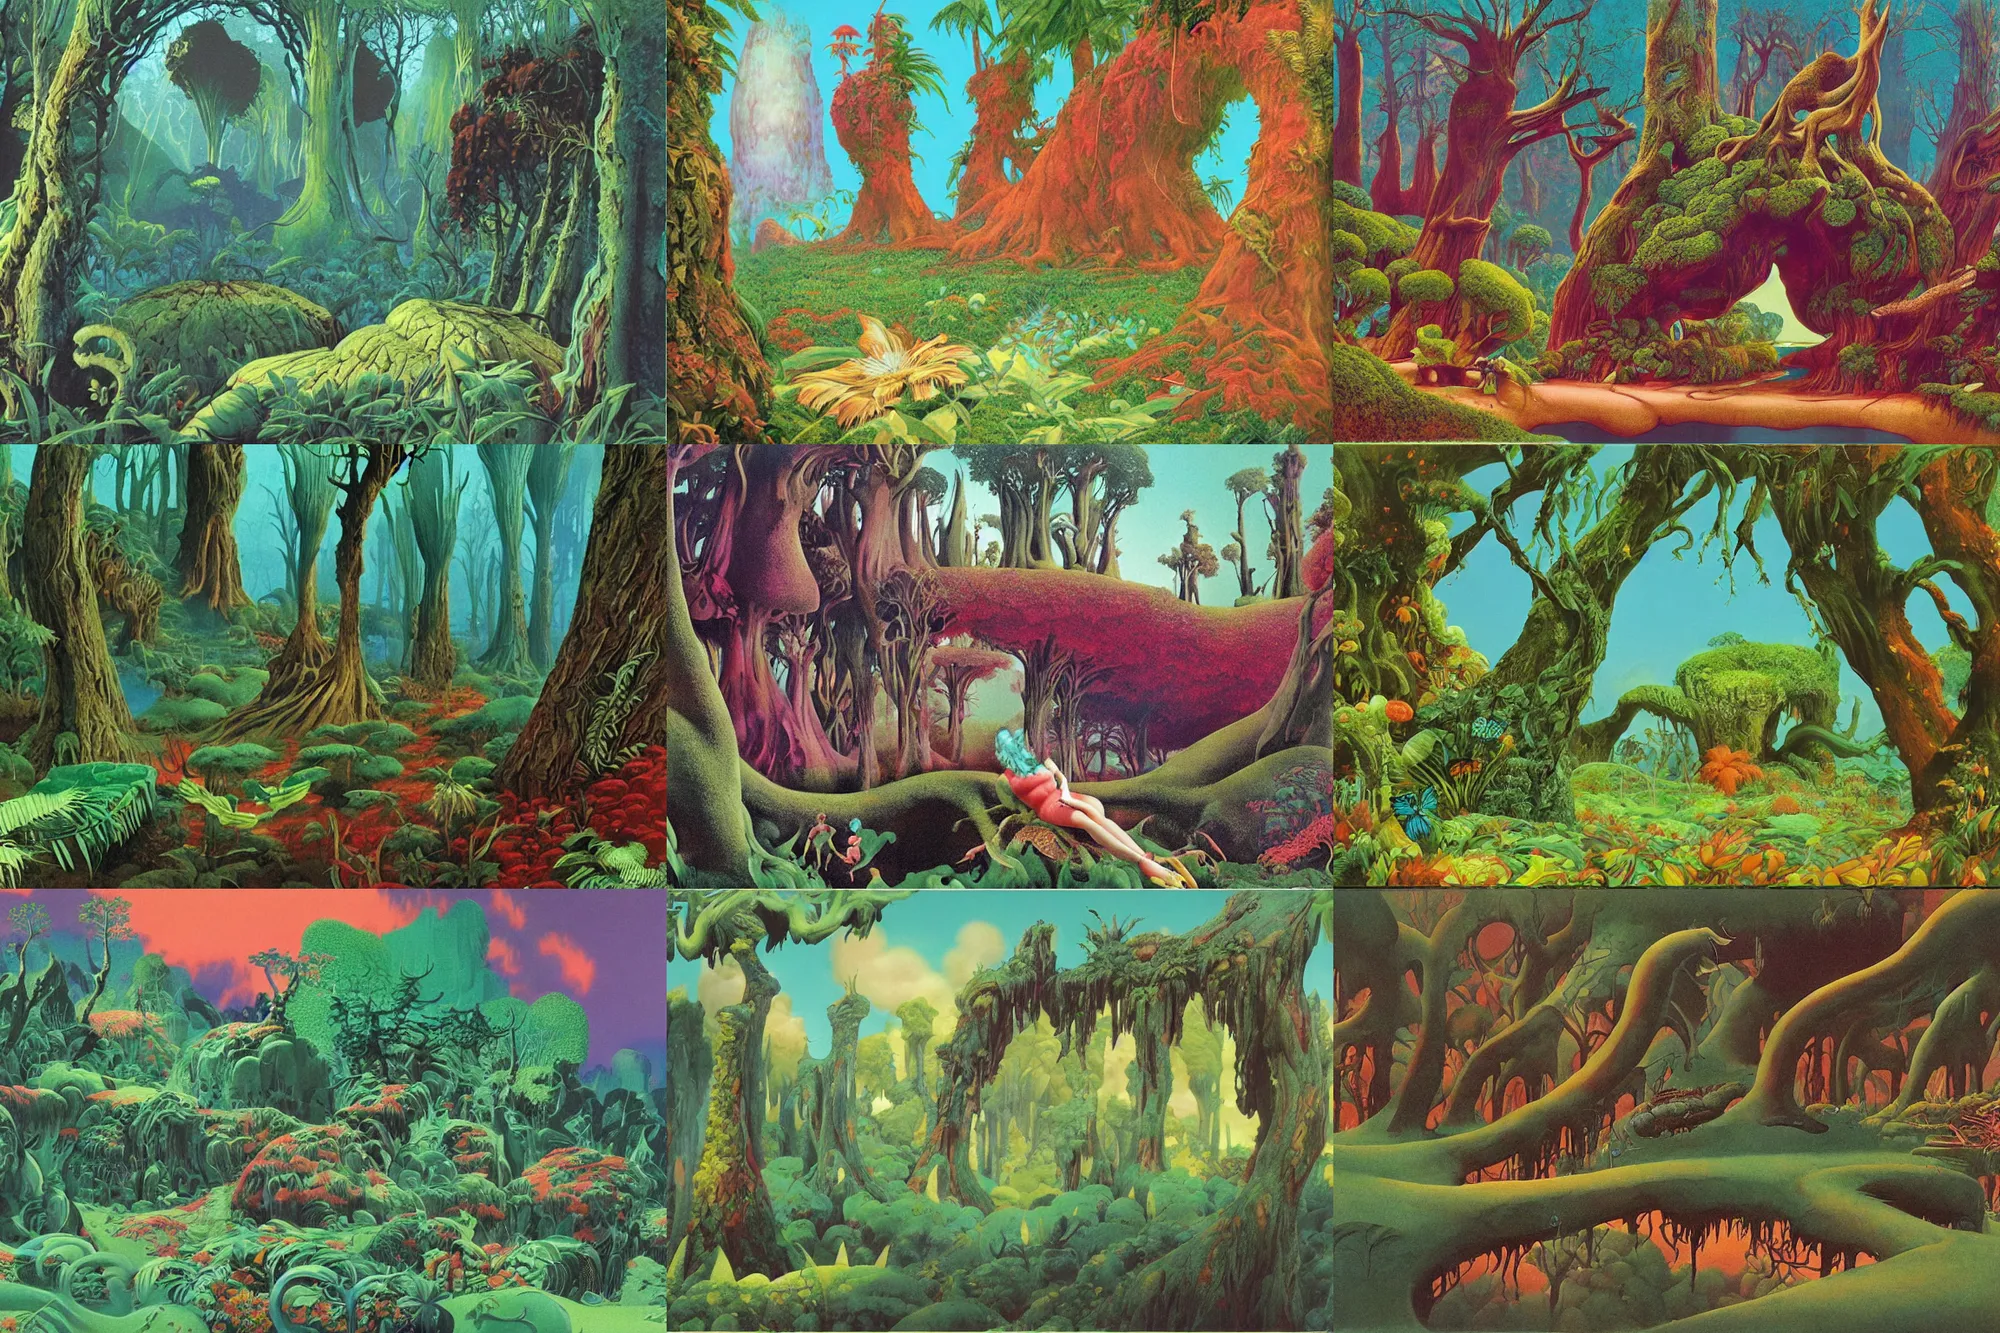 Prompt: Forrest Dream by Roger Dean, 1970s